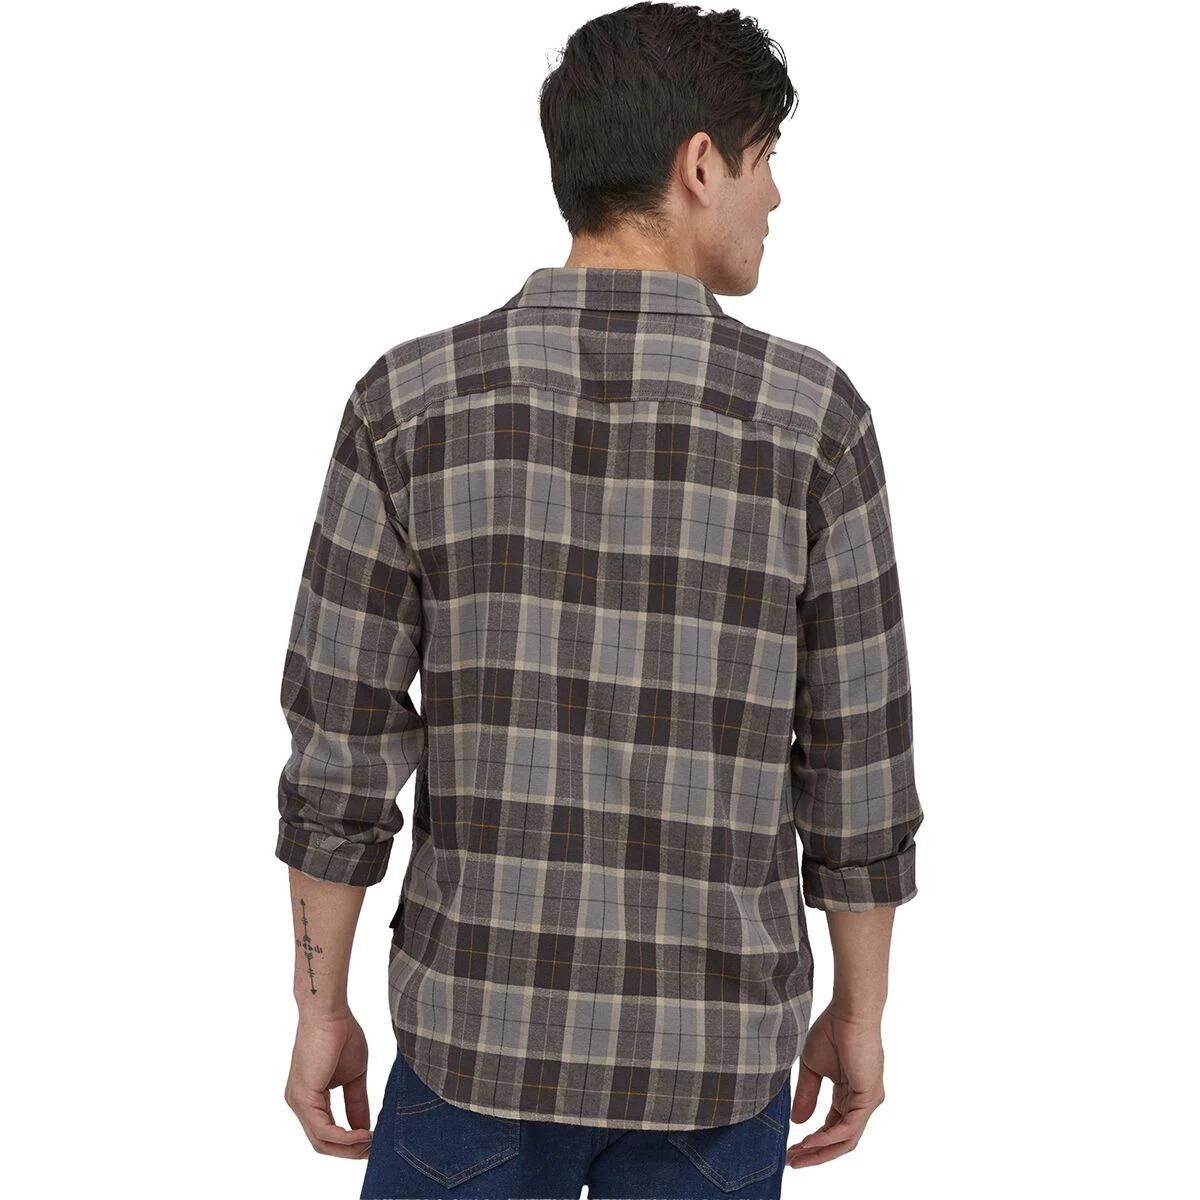 Patagonia Long-Sleeve Cotton in Conversion Fjord Flannel Shirt - Men's